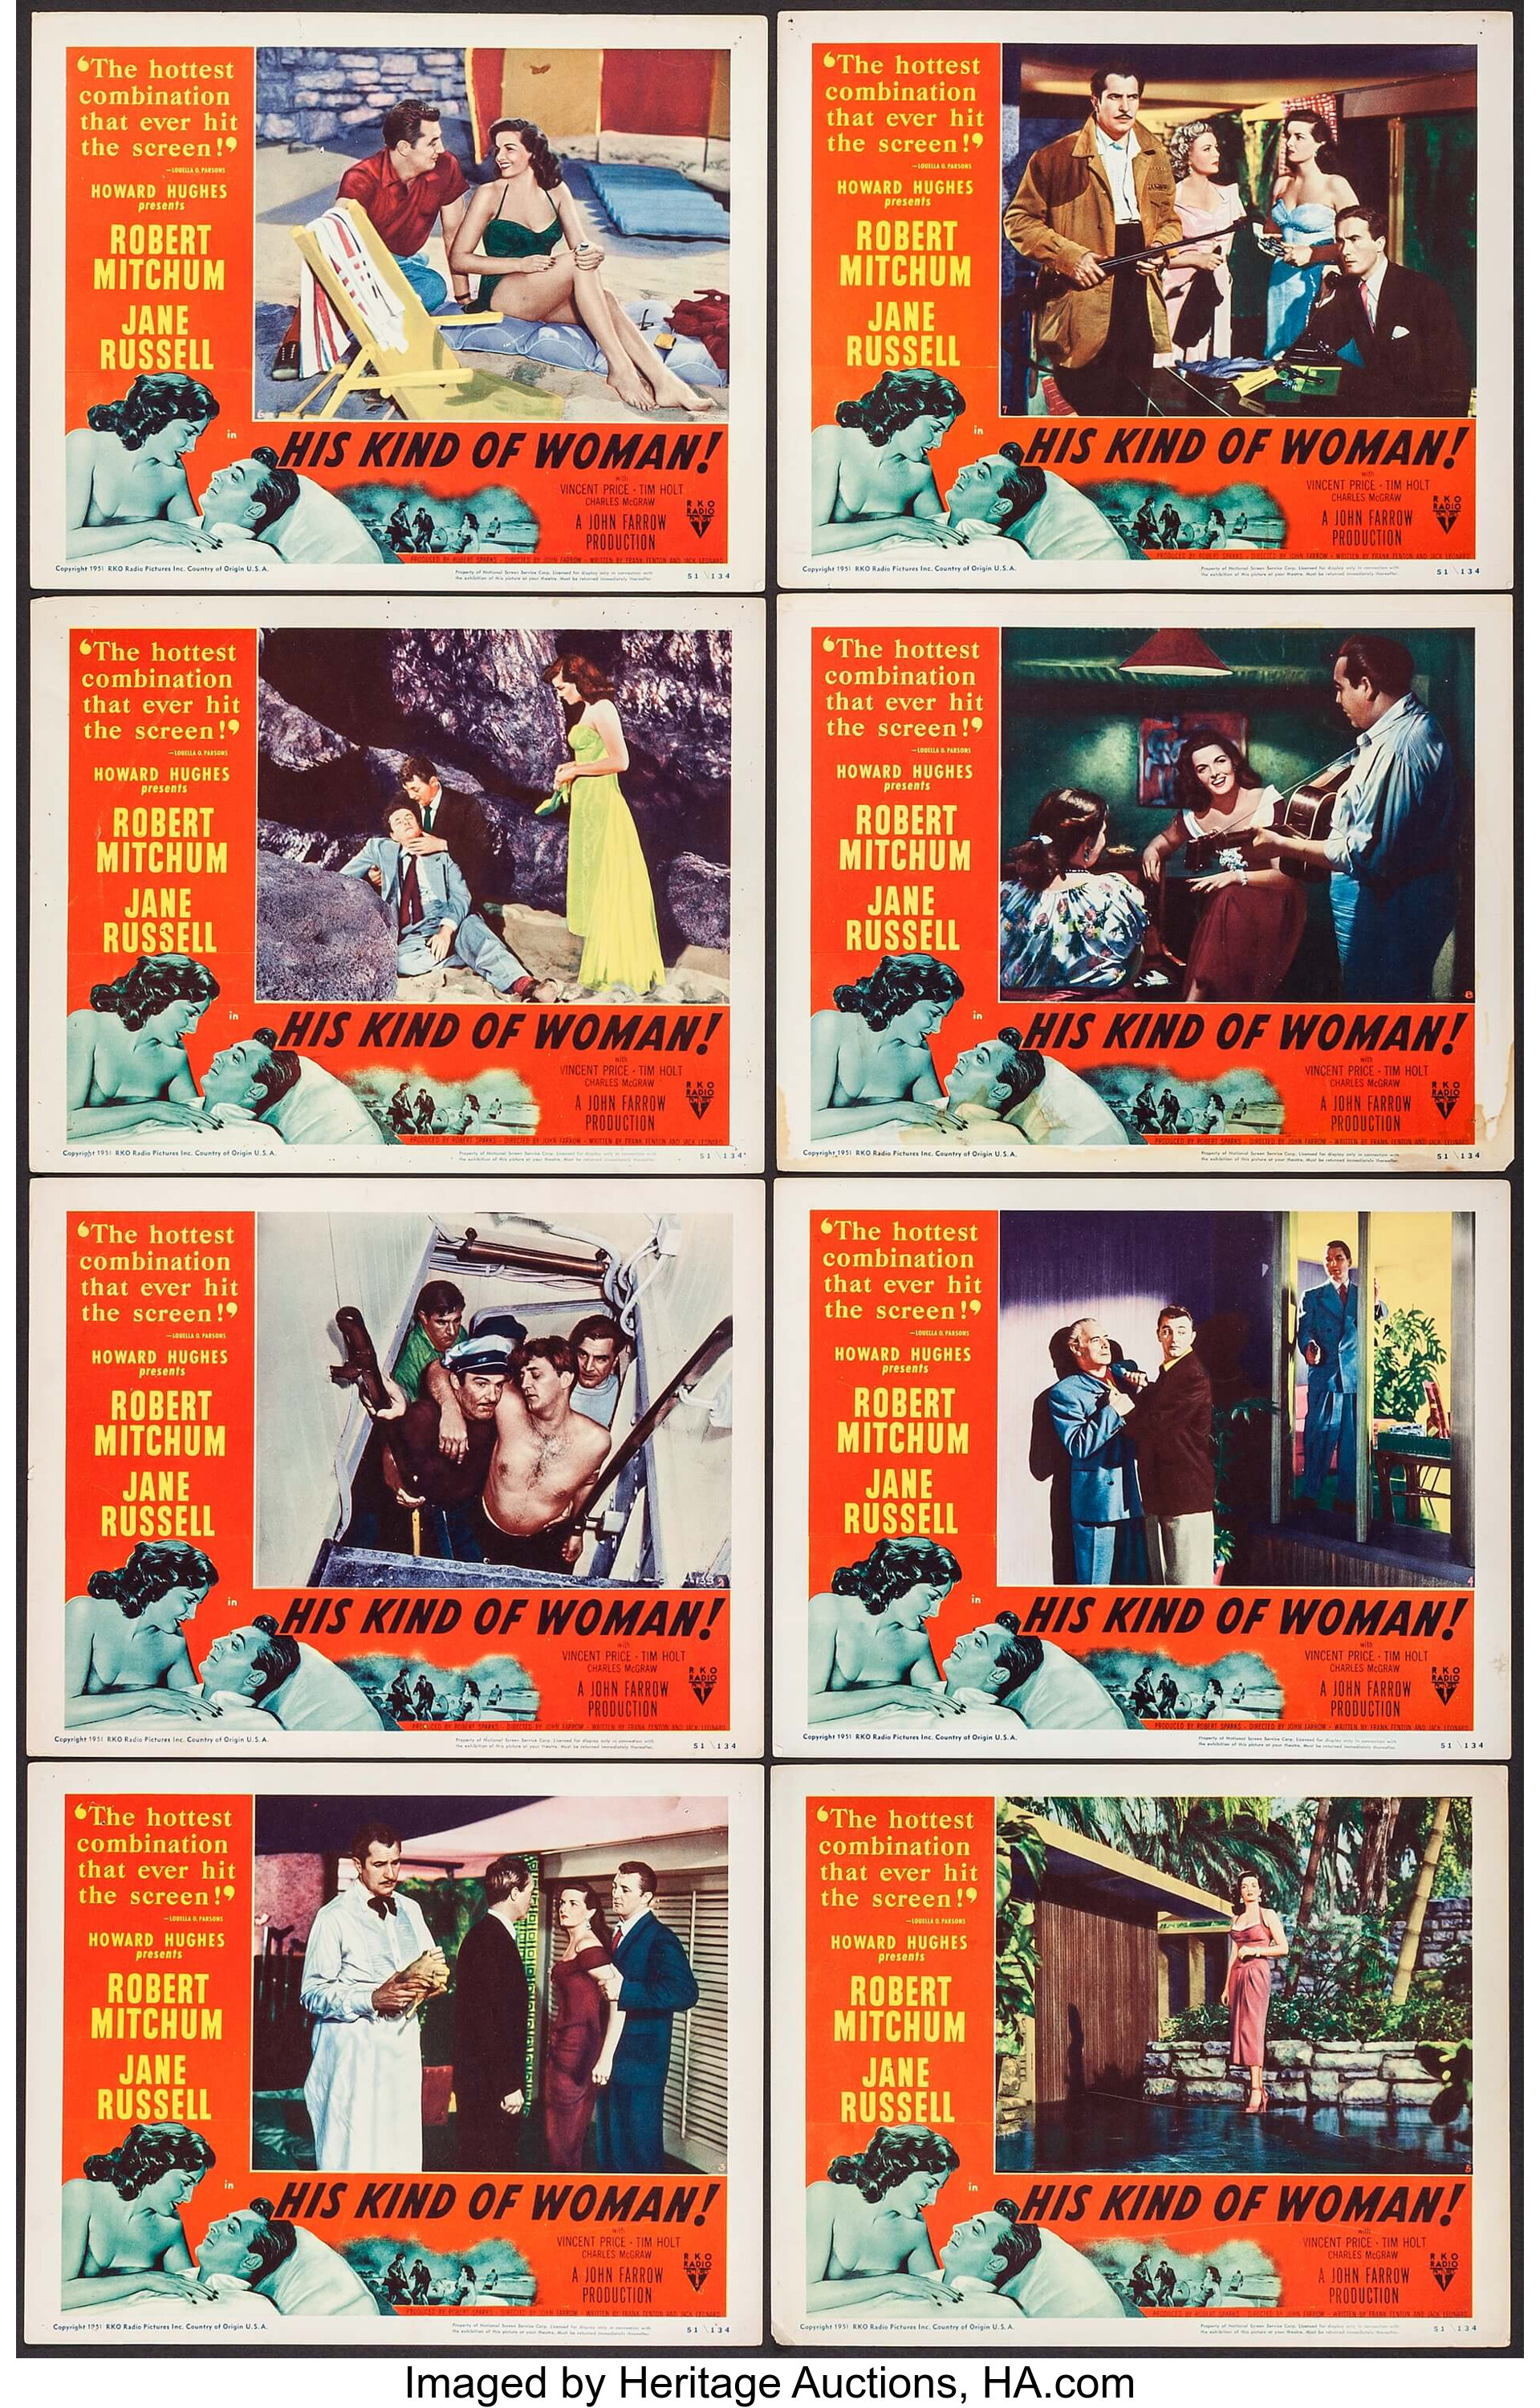 His Kind Of Woman Rko 1951 Lobby Card Set Of 8 11 X 14 Lot 51183 Heritage Auctions 4487